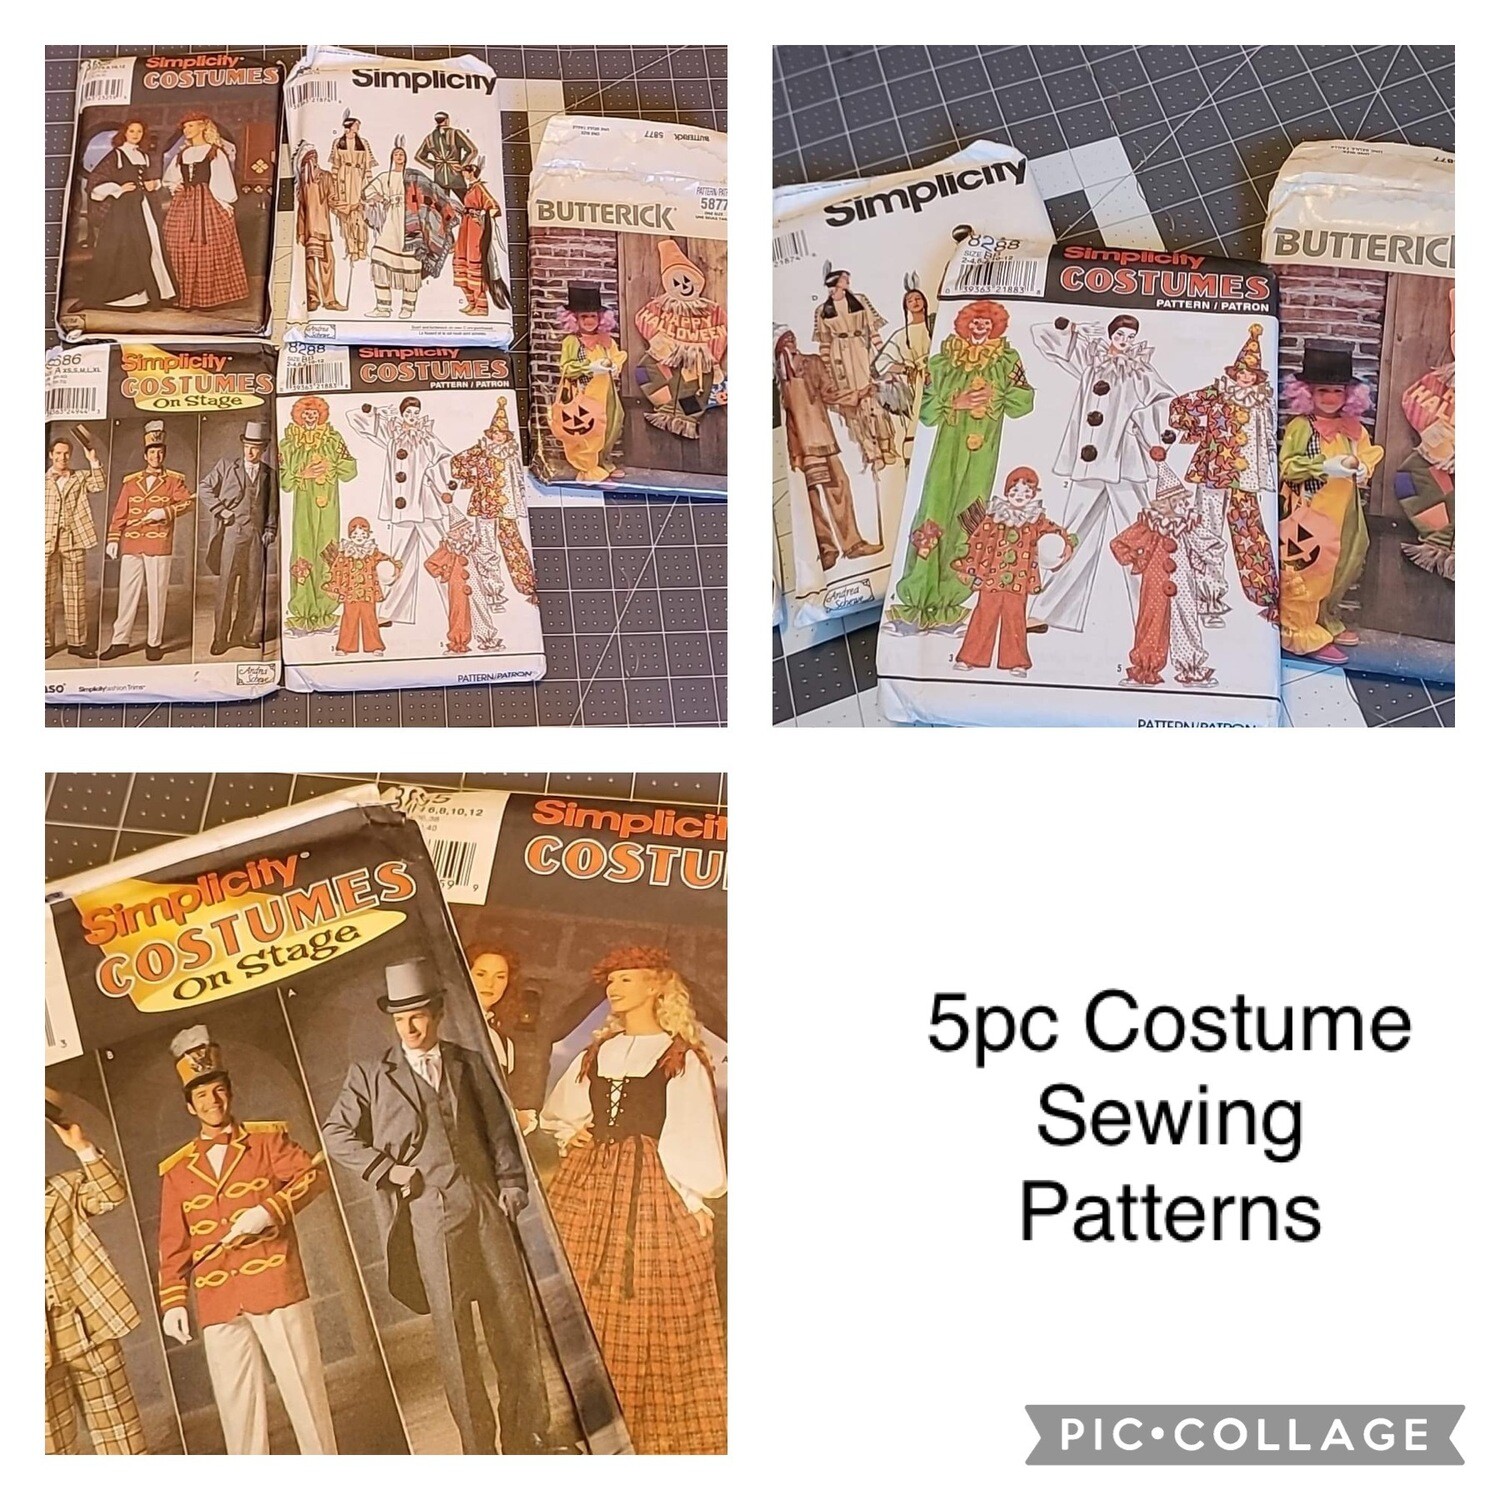 5pc Costume Sewing